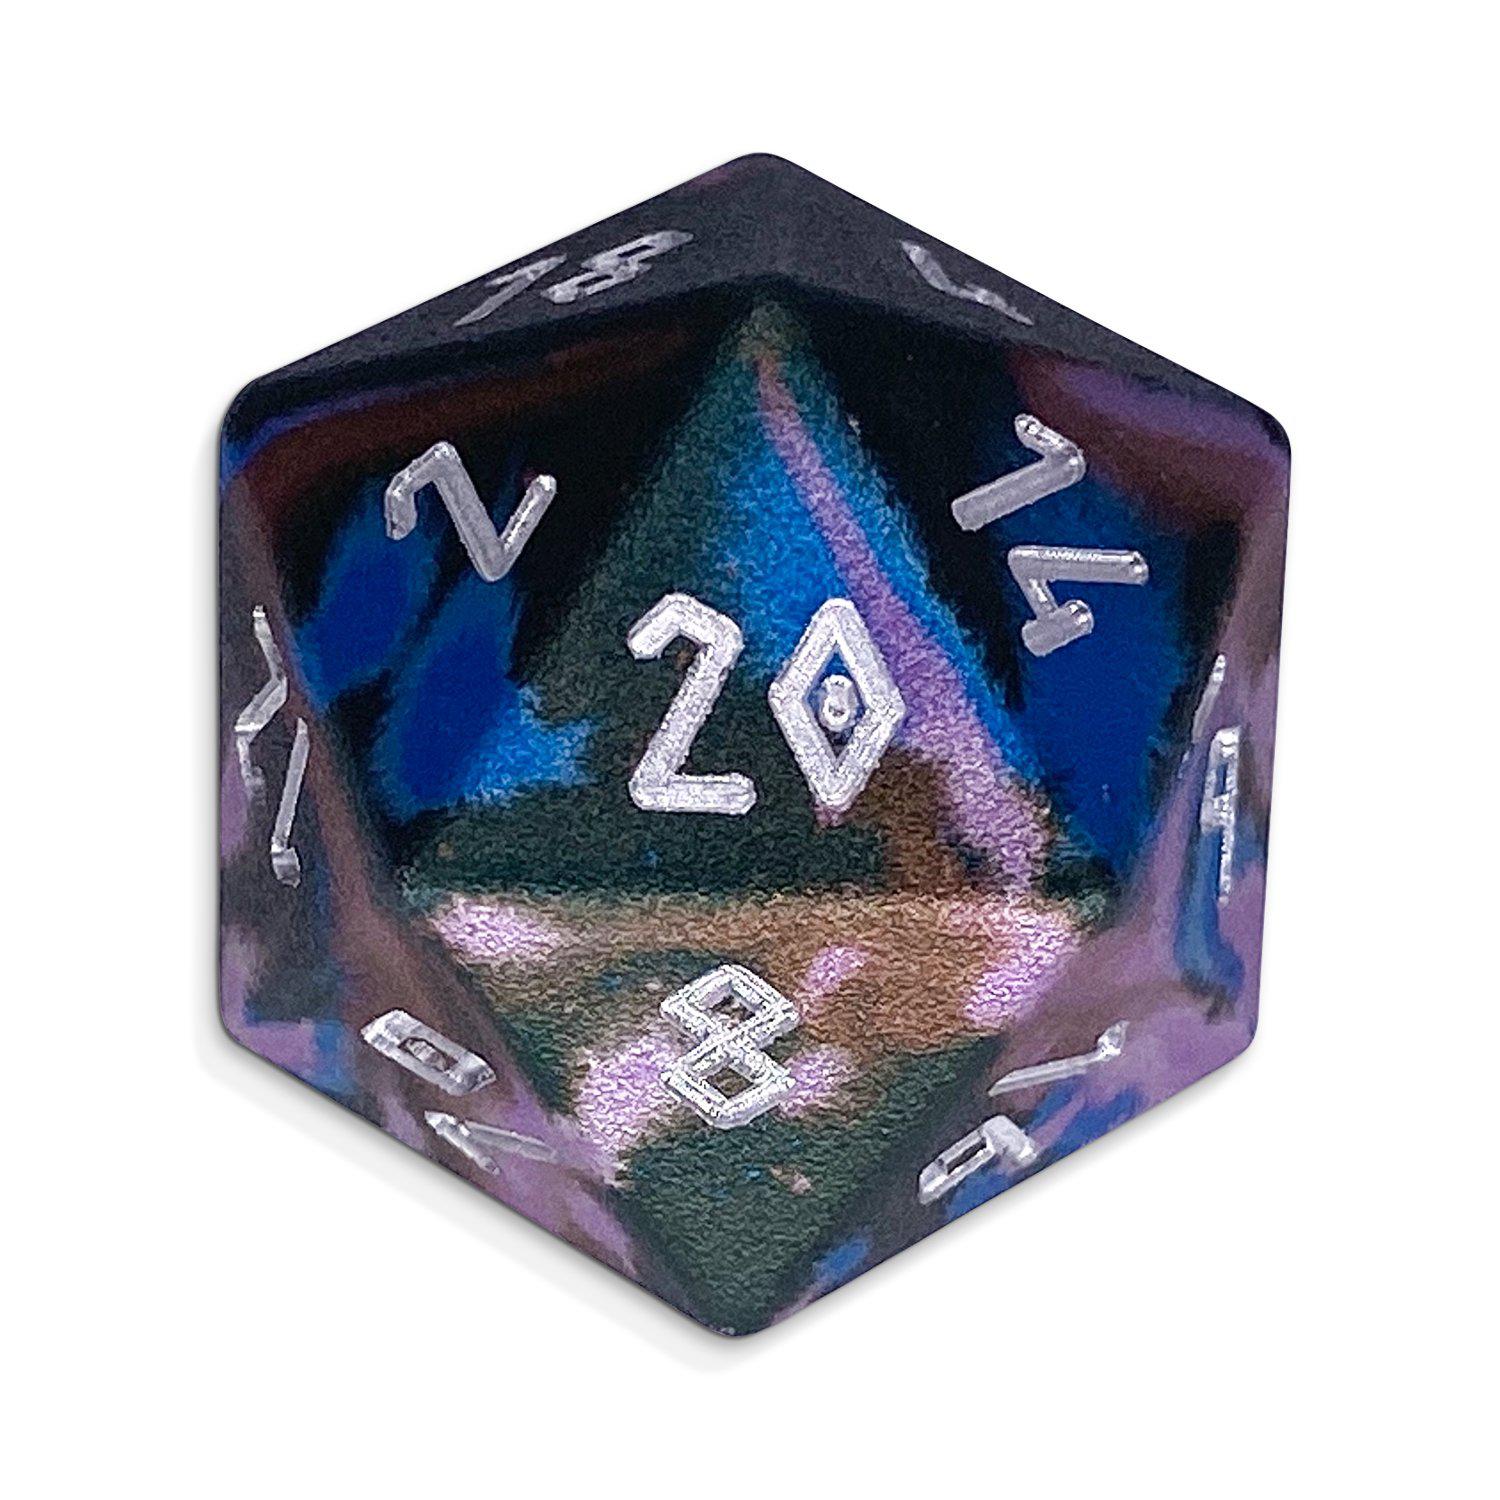 Single Wondrous Dice® D20 in Enchanted Forest by Norse Foundry 6063 Aircraft Grade Aluminum - NOR 02399